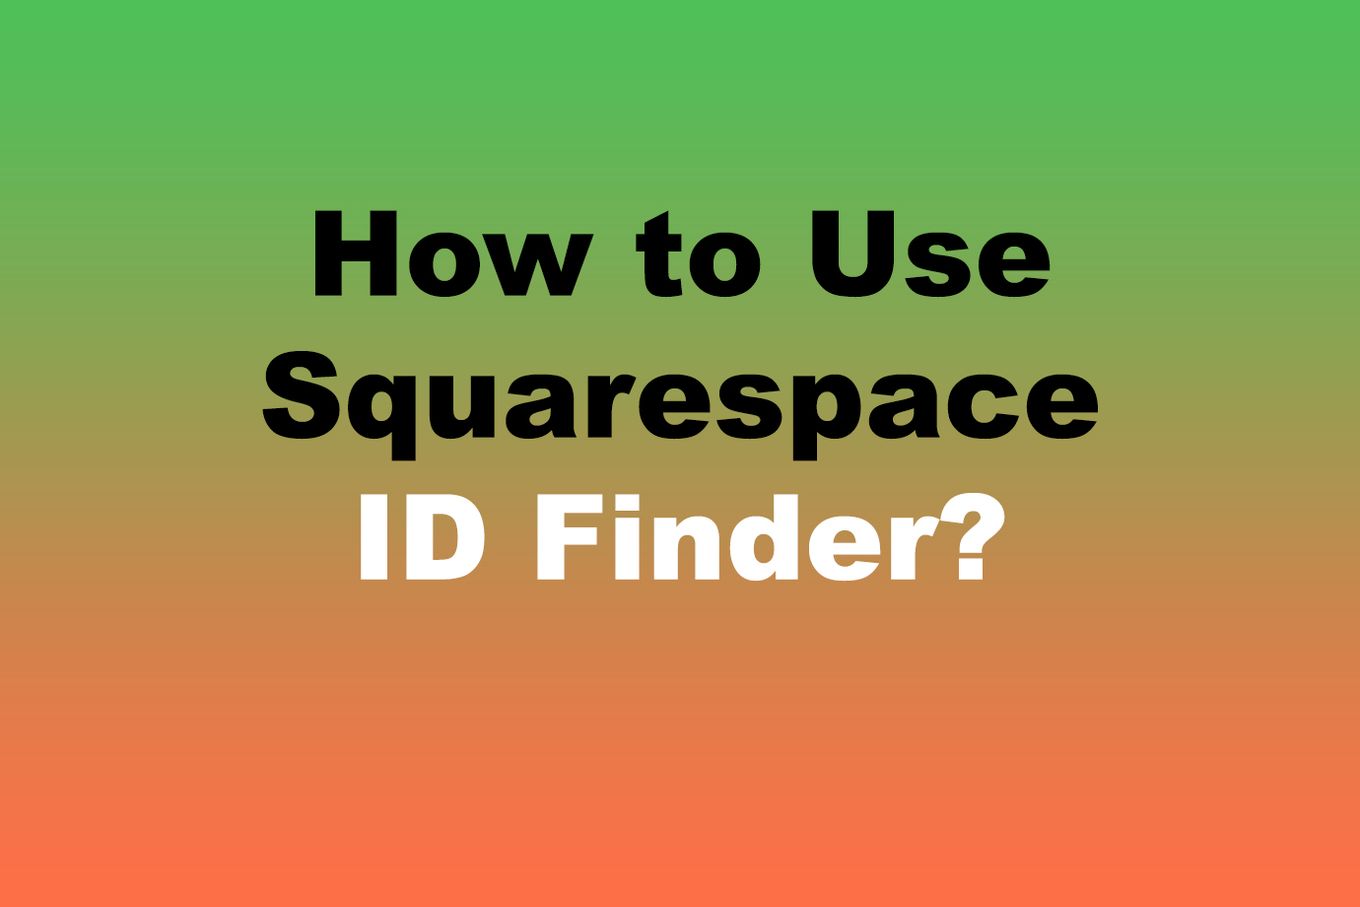 How to Use Squarespace ID Finder